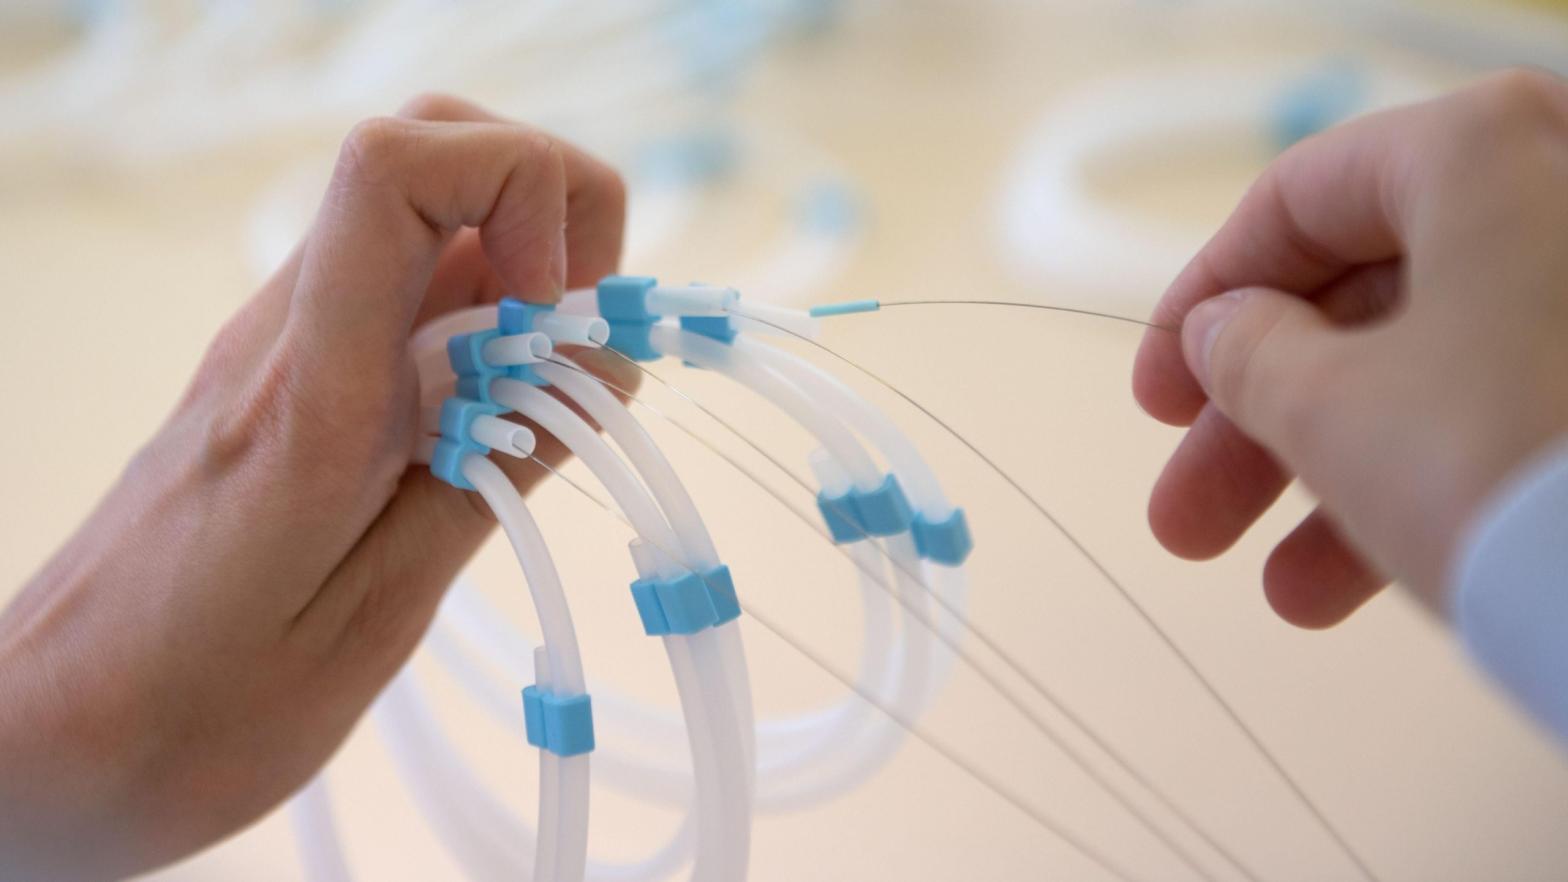 The minimally invasive surgery involves using a catheter to block an artery key to producing ghrelin. Above, an employee assembling catheters. (Photo: GERARD JULIEN/AFP, Getty Images)